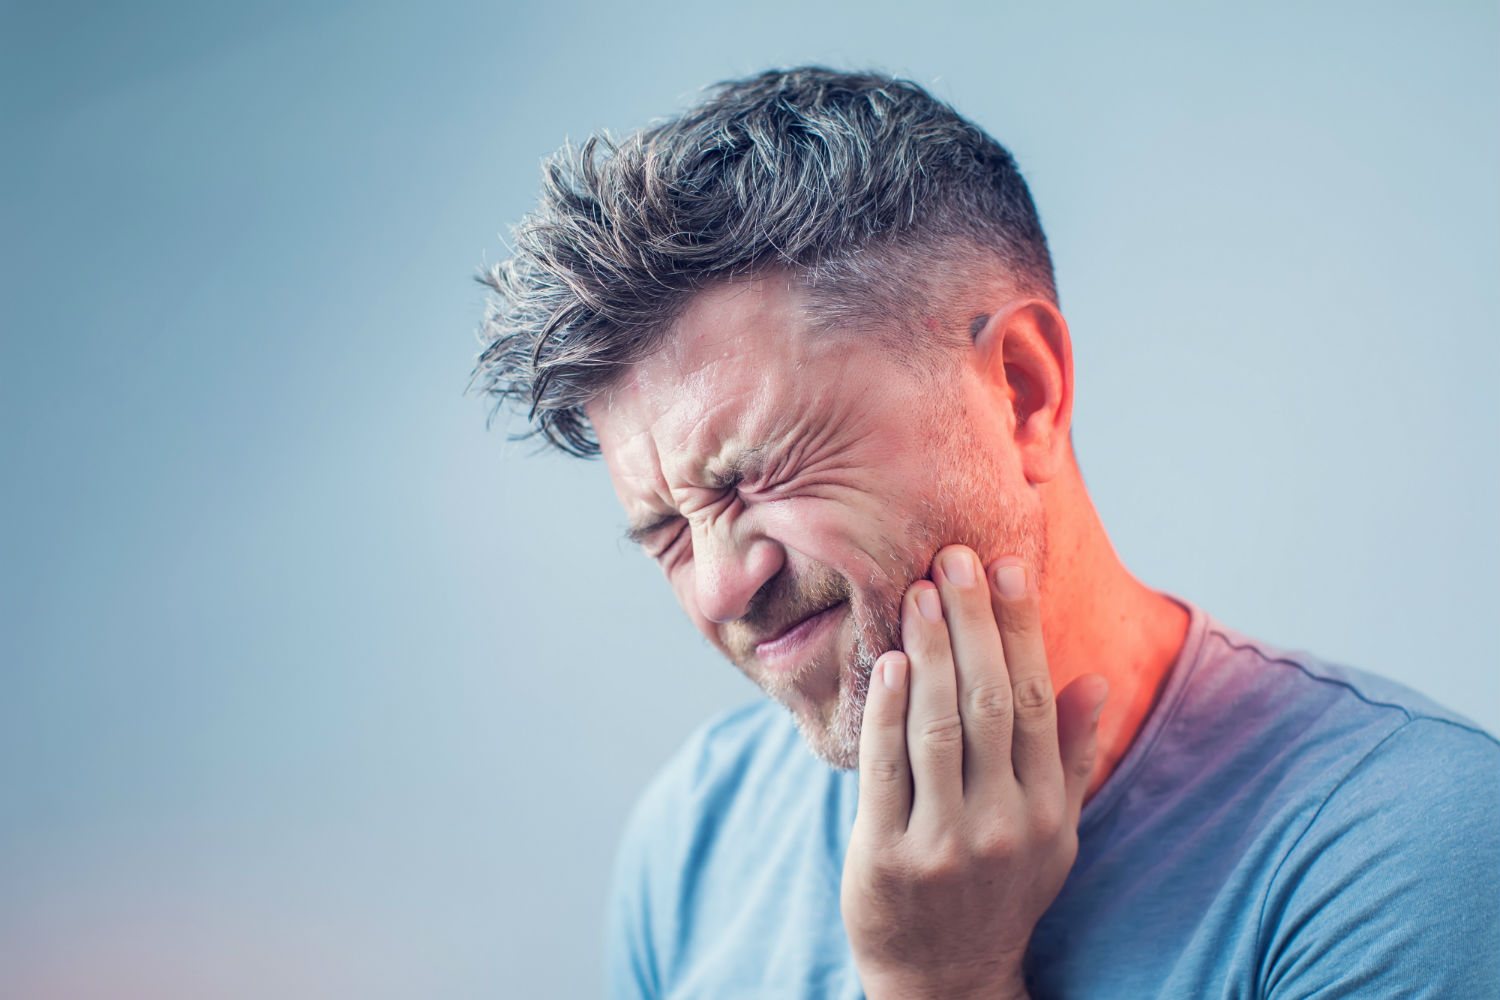 A toothache can become a dental emergency if not treated